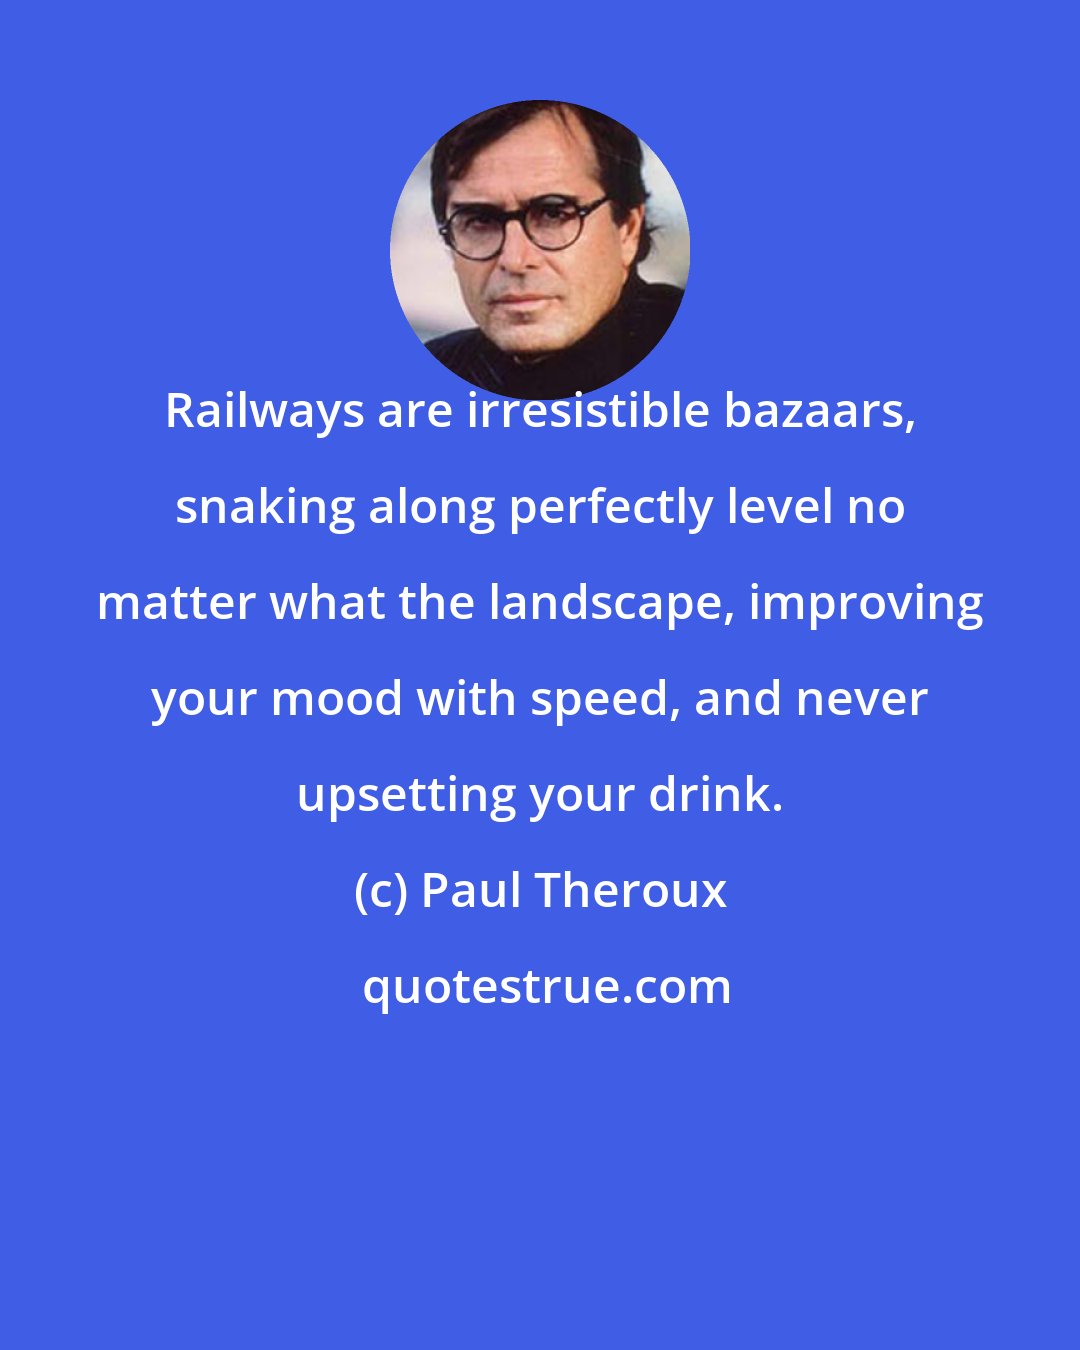 Paul Theroux: Railways are irresistible bazaars, snaking along perfectly level no matter what the landscape, improving your mood with speed, and never upsetting your drink.